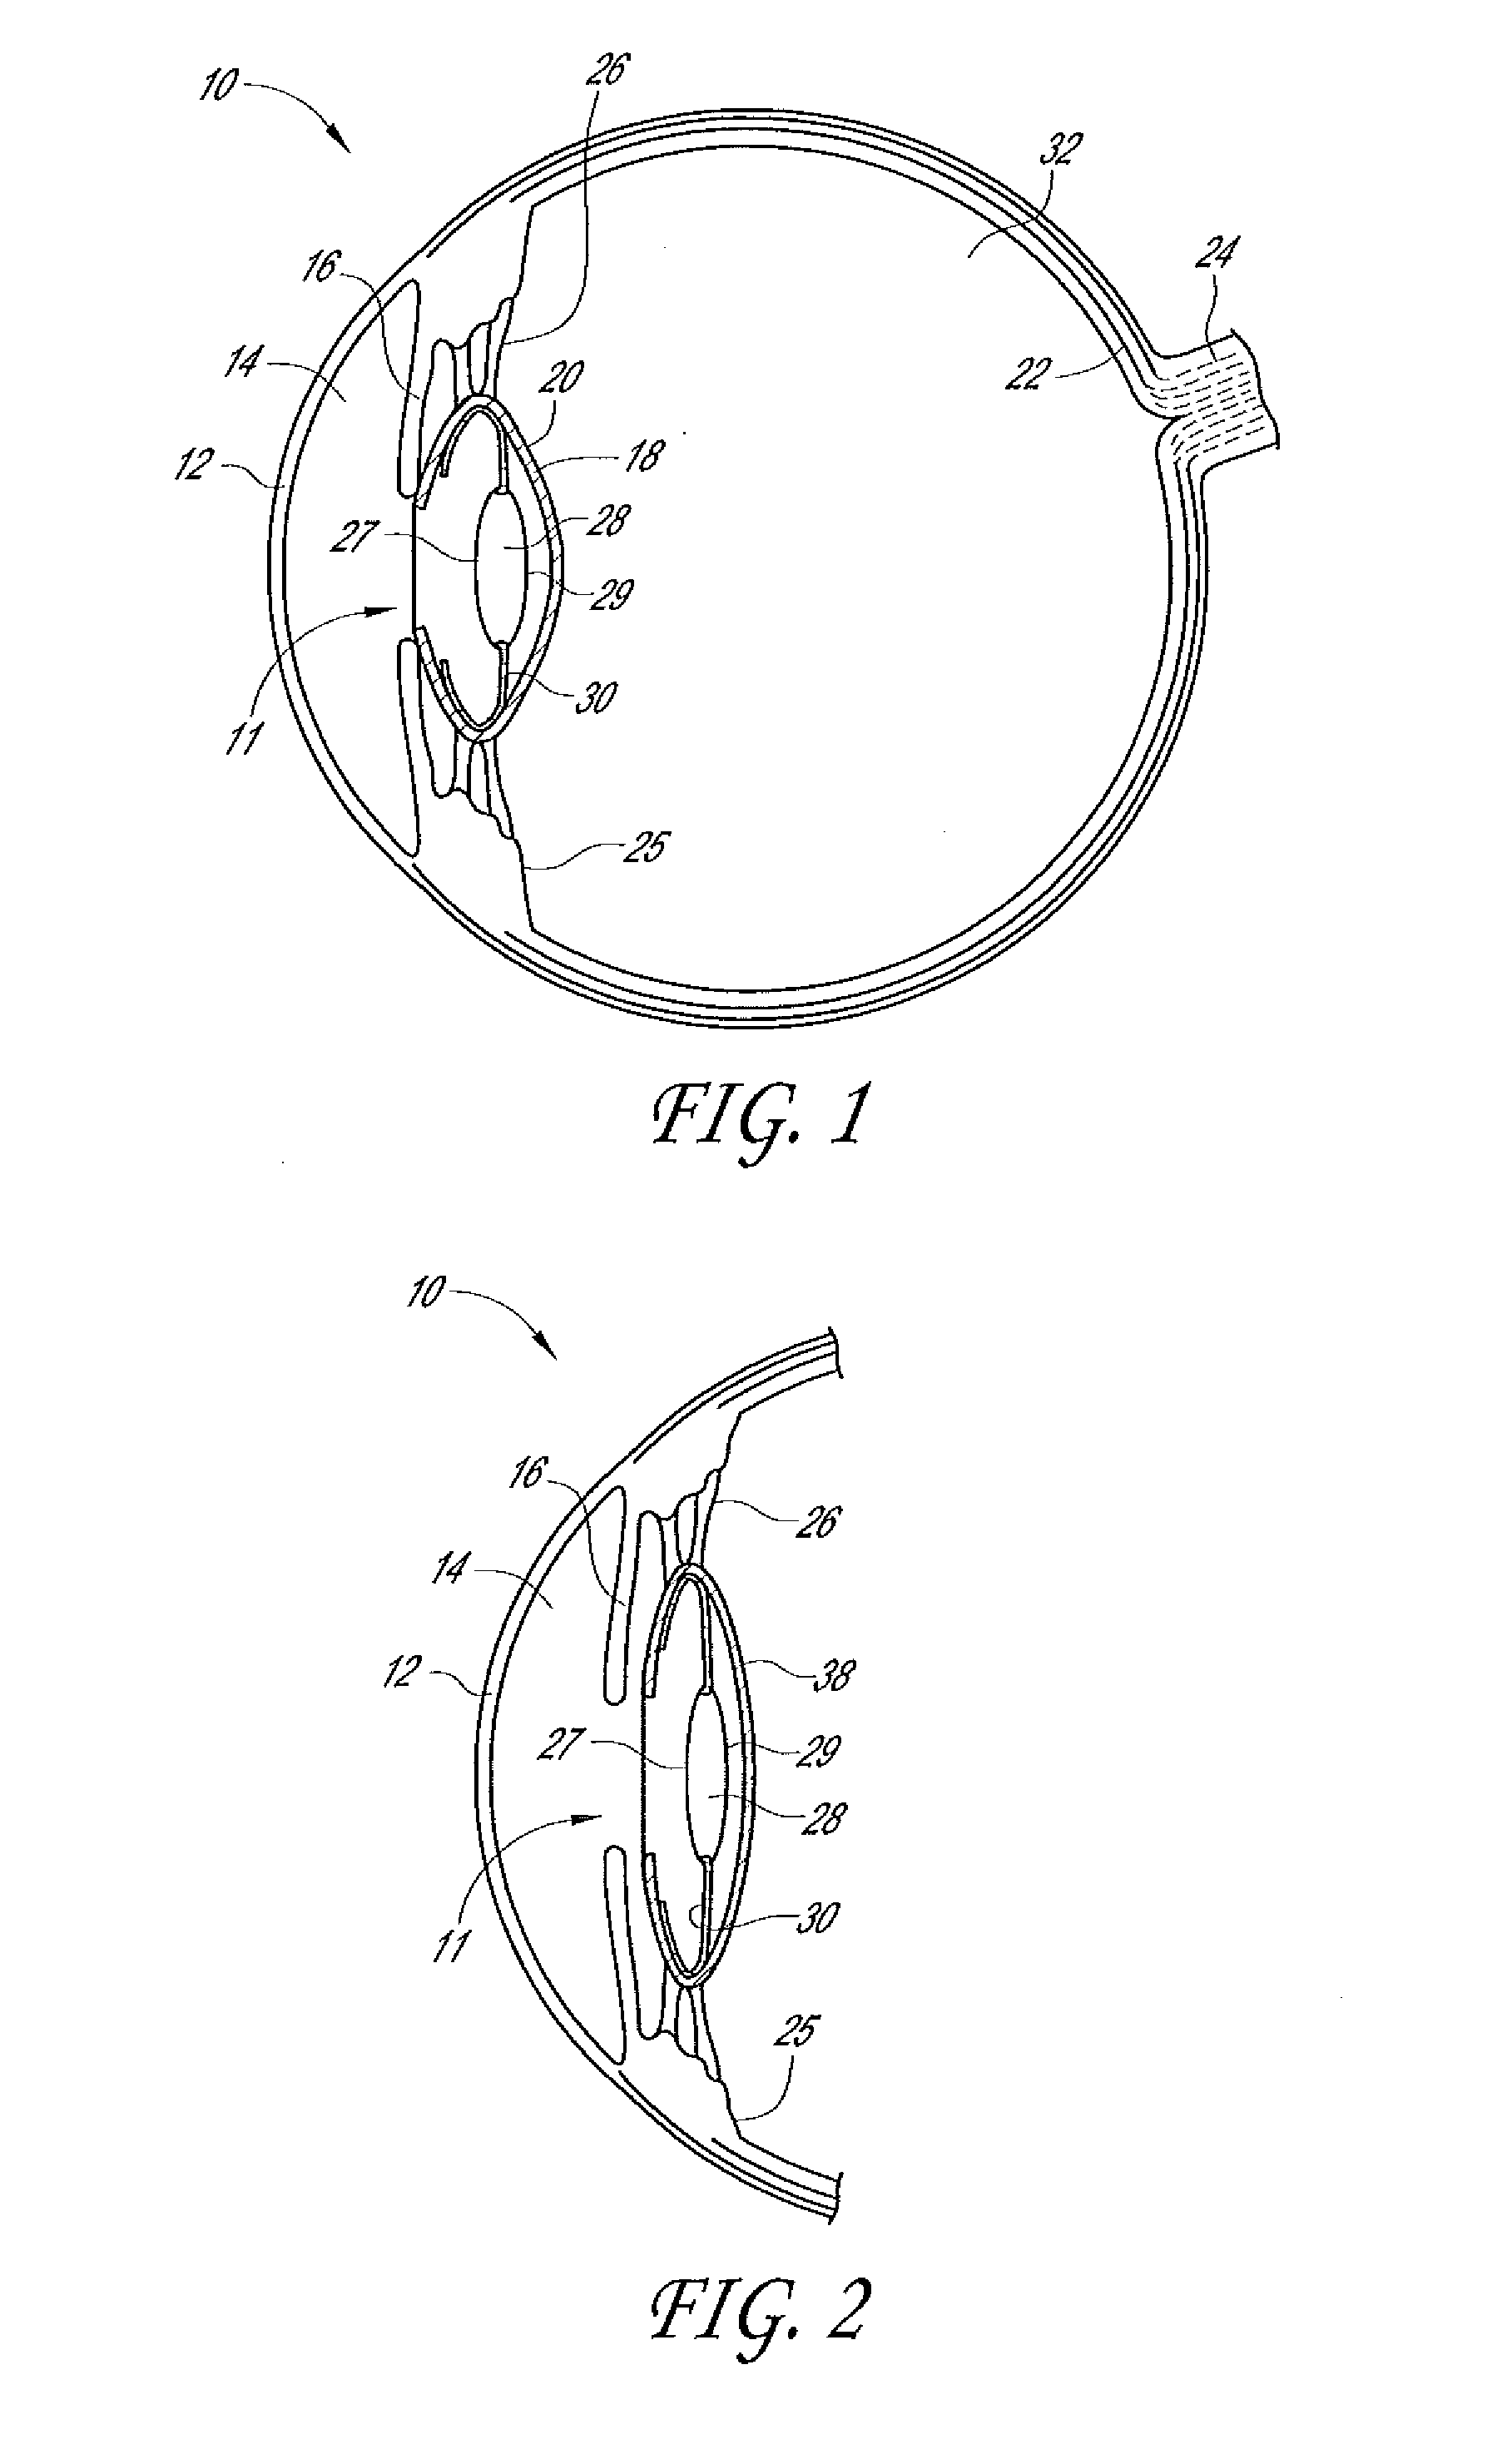 Intraocular lens with shape changing capability to provide enhanced accomodation and visual acuity